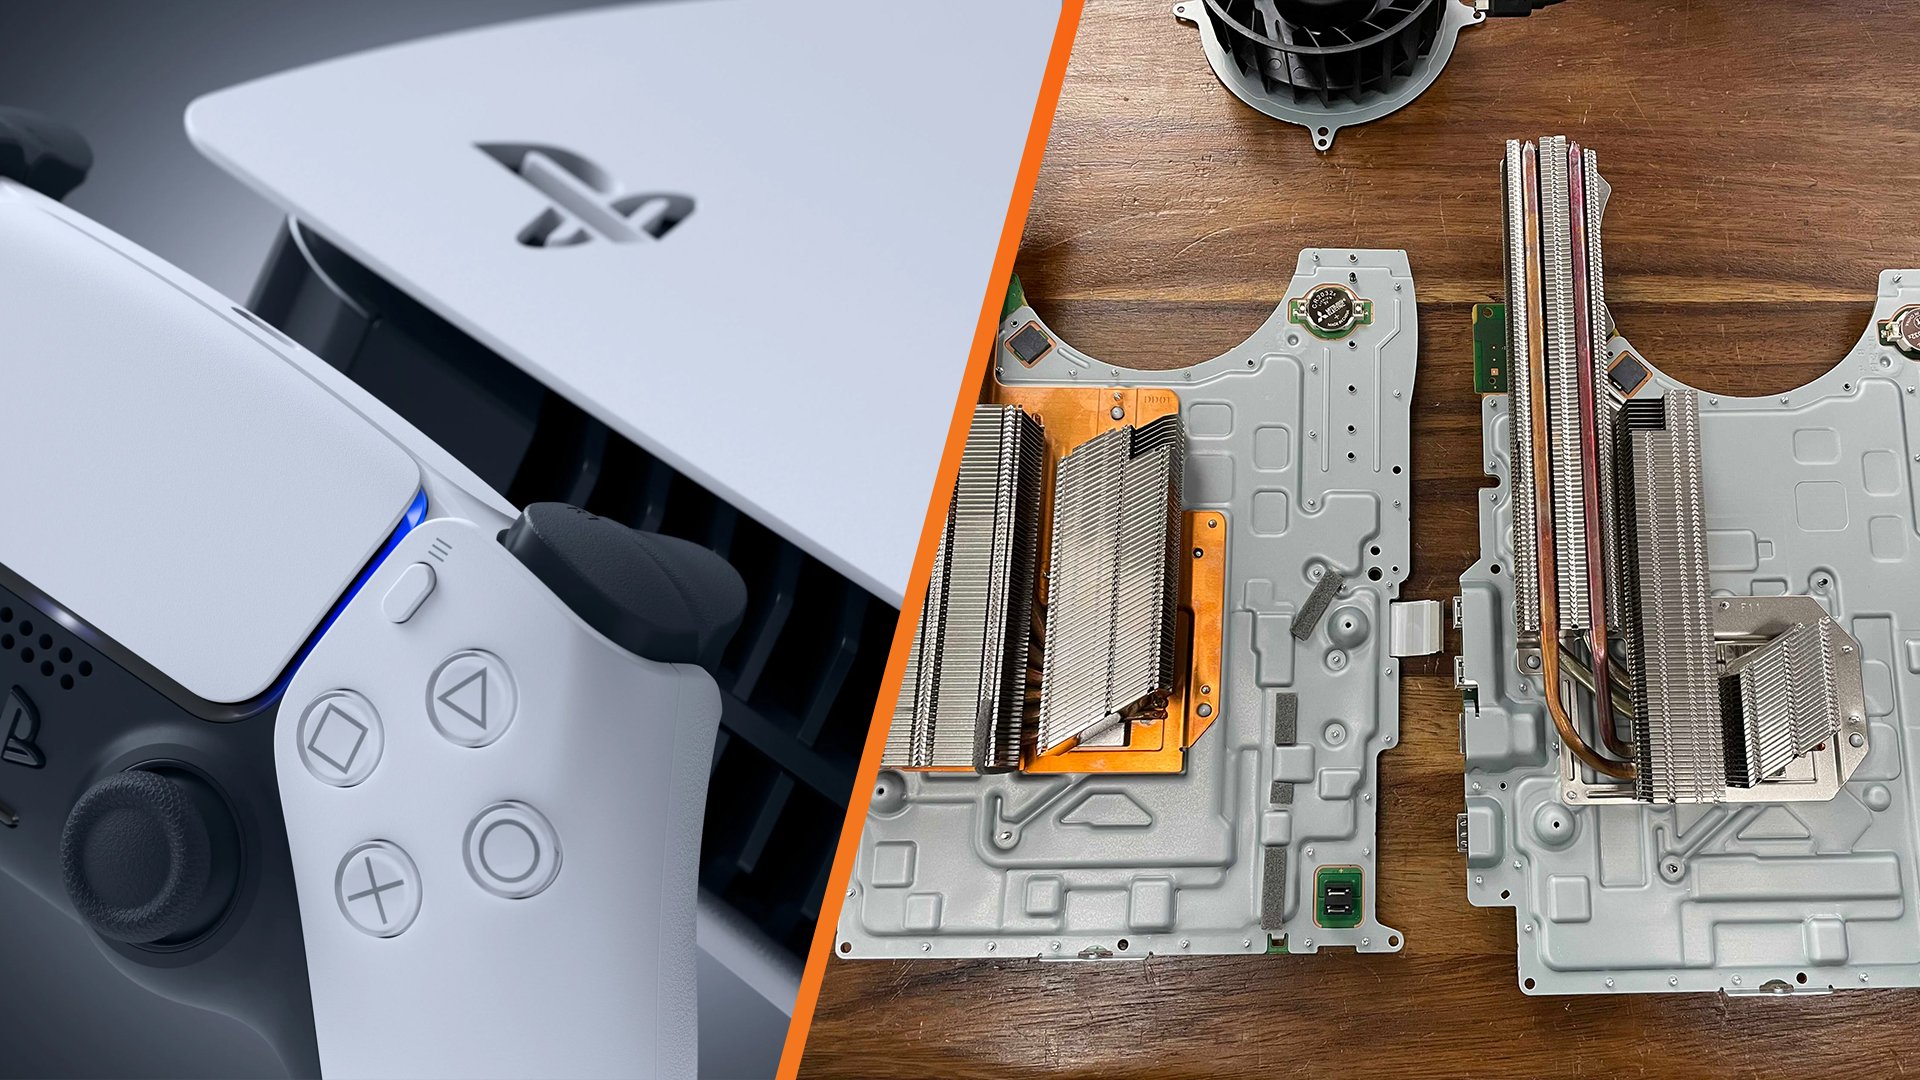 PS5 Slim teardown reveals how console will be quieter than